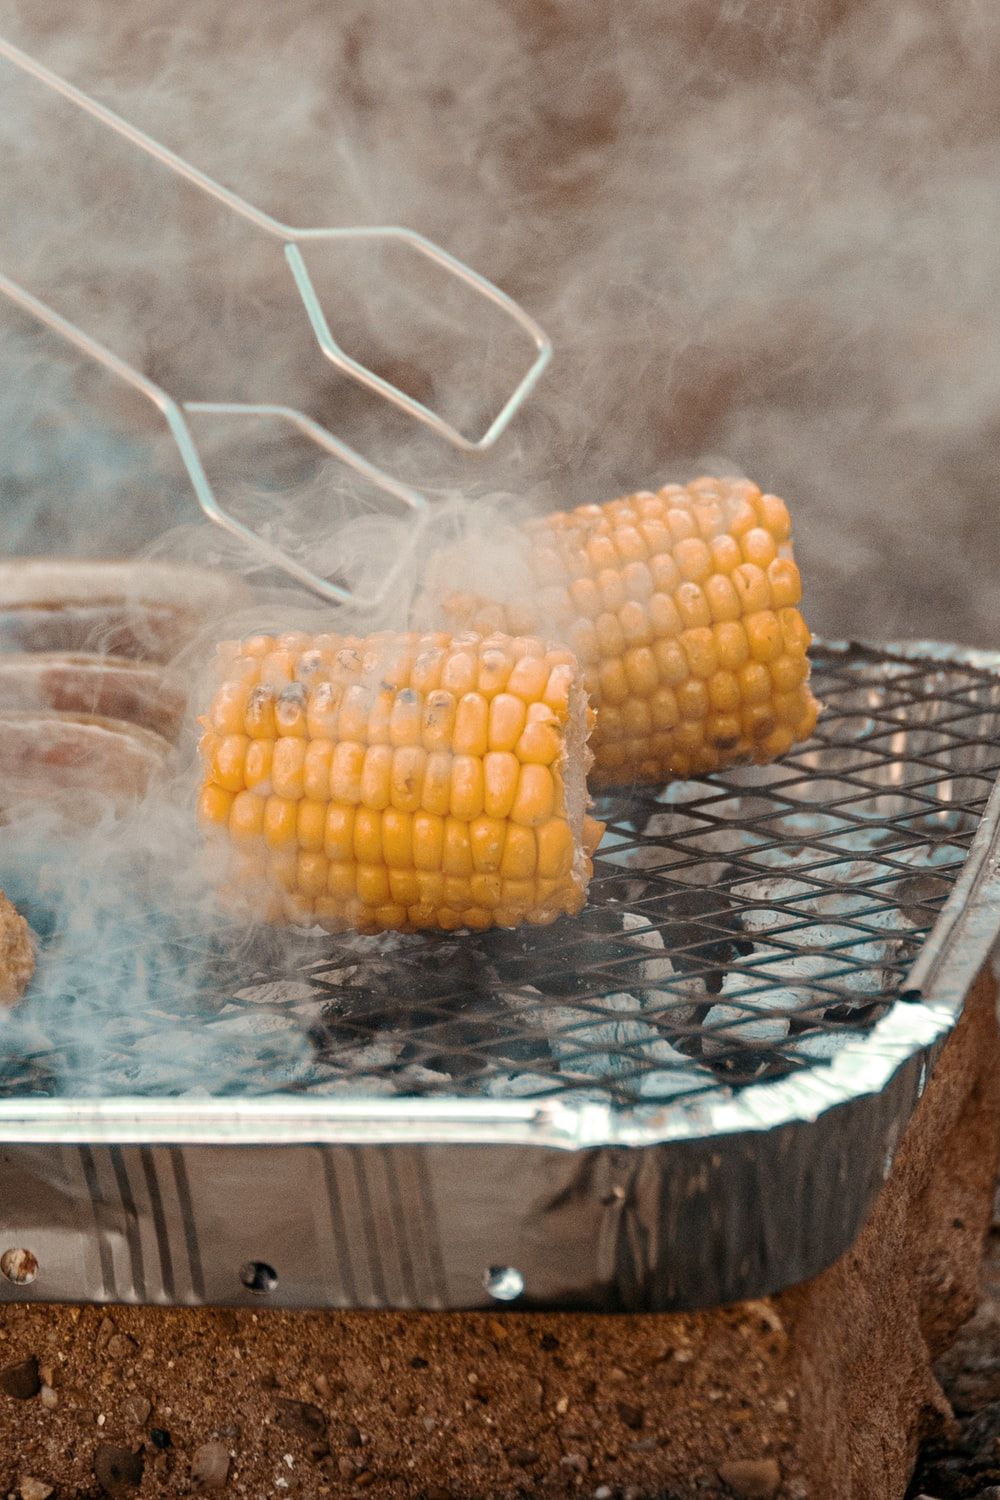 Sweet Corn Picture. Download Free Image